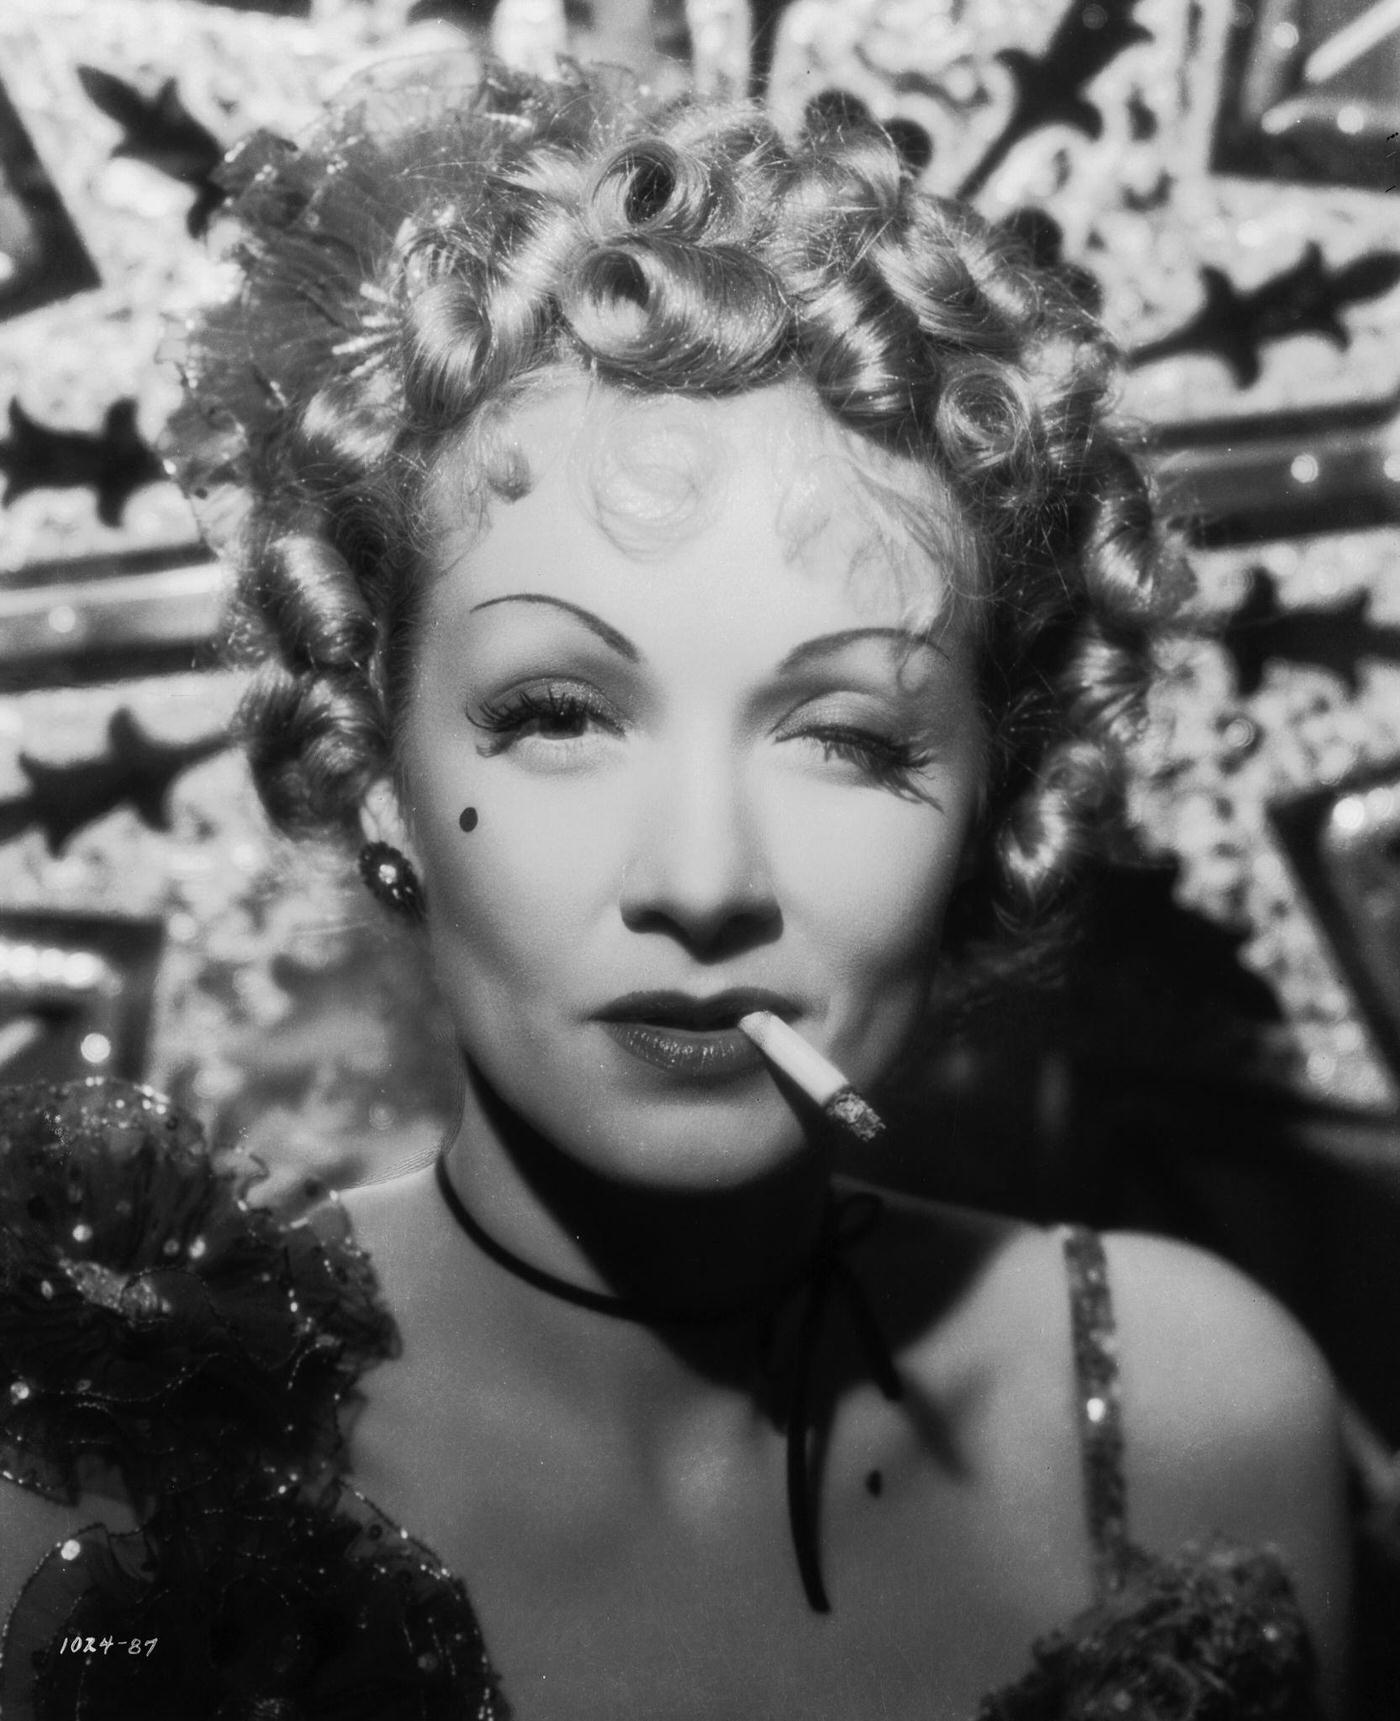 Marlene Dietrich plays Frenchy in a scene from the 1937 film 'Destry Rides Again.'